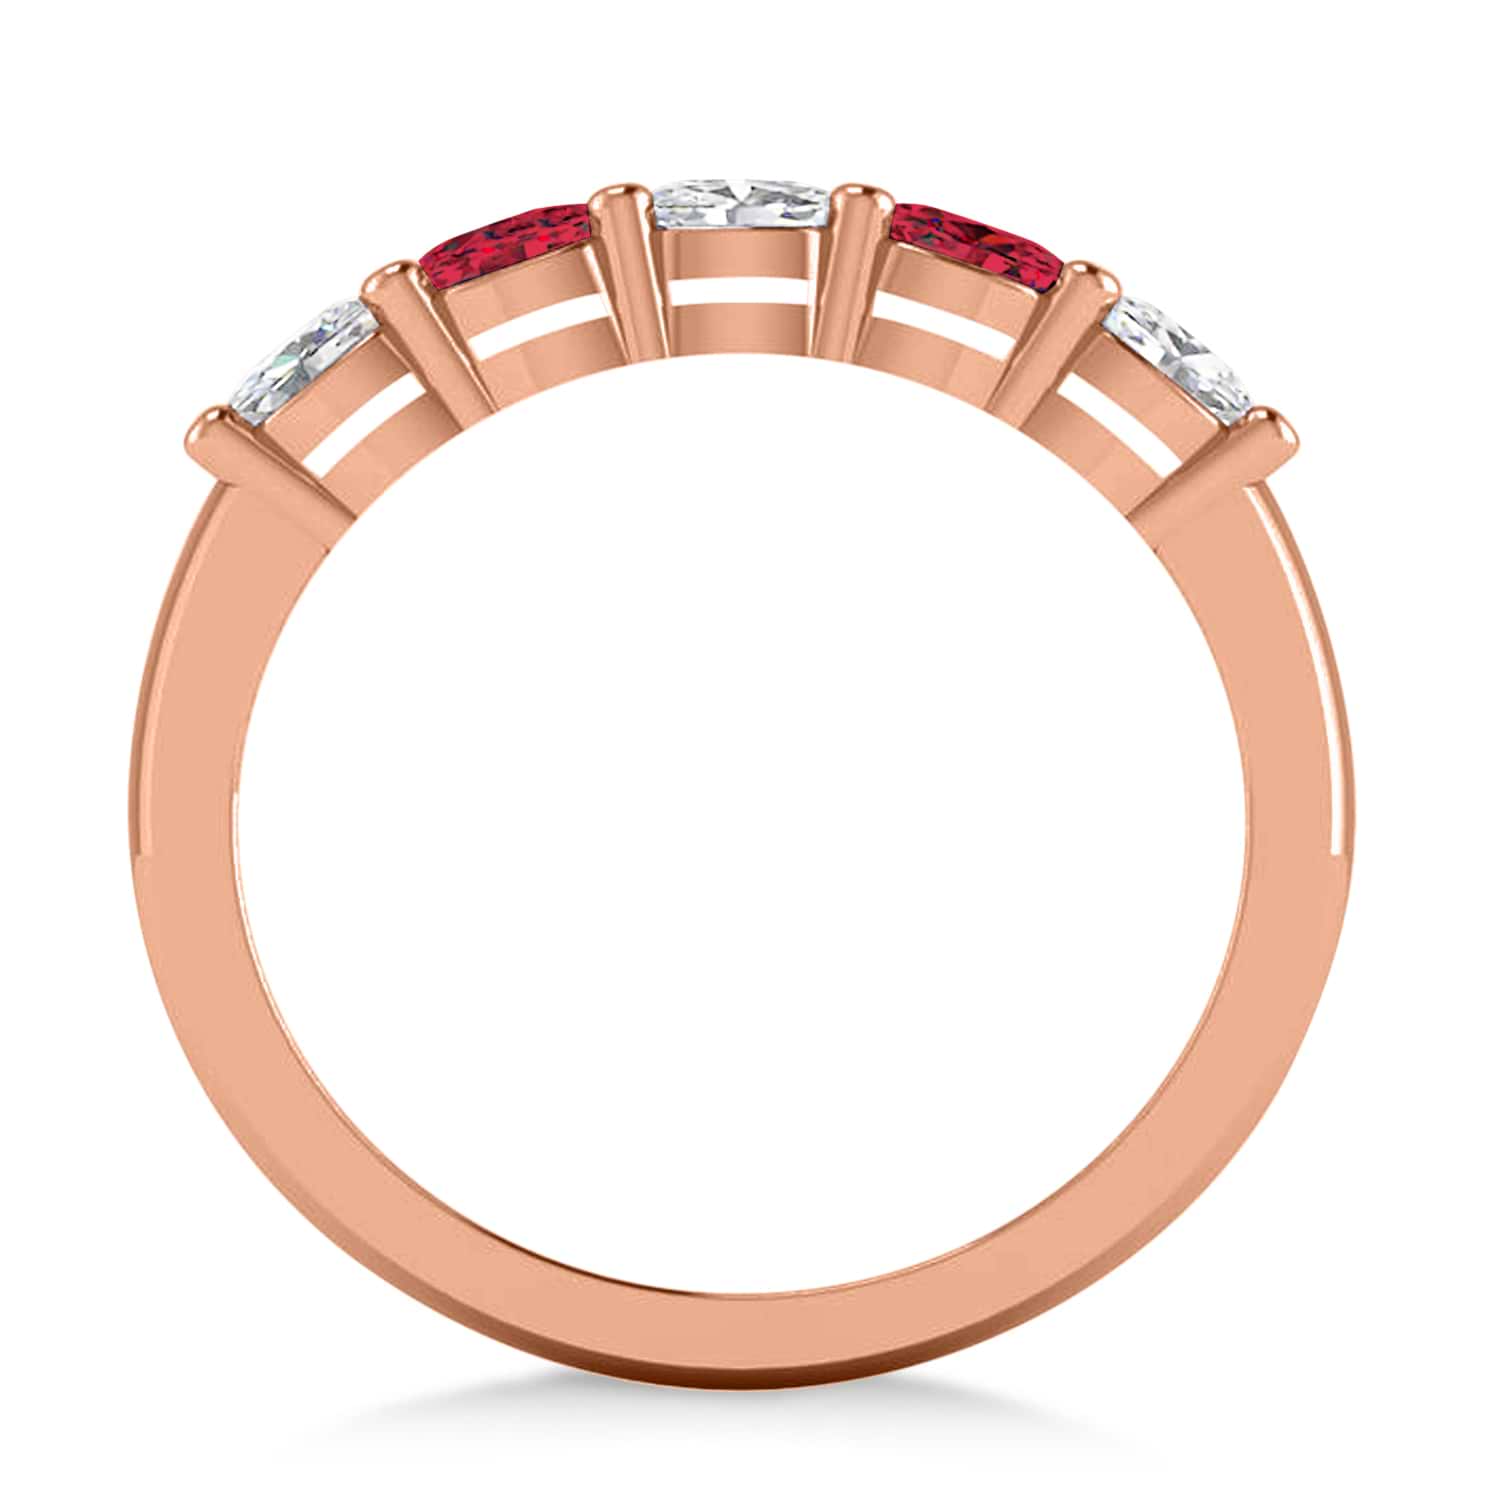 Oval Diamond & Ruby Five Stone Ring 14k Rose Gold (1.00ct)